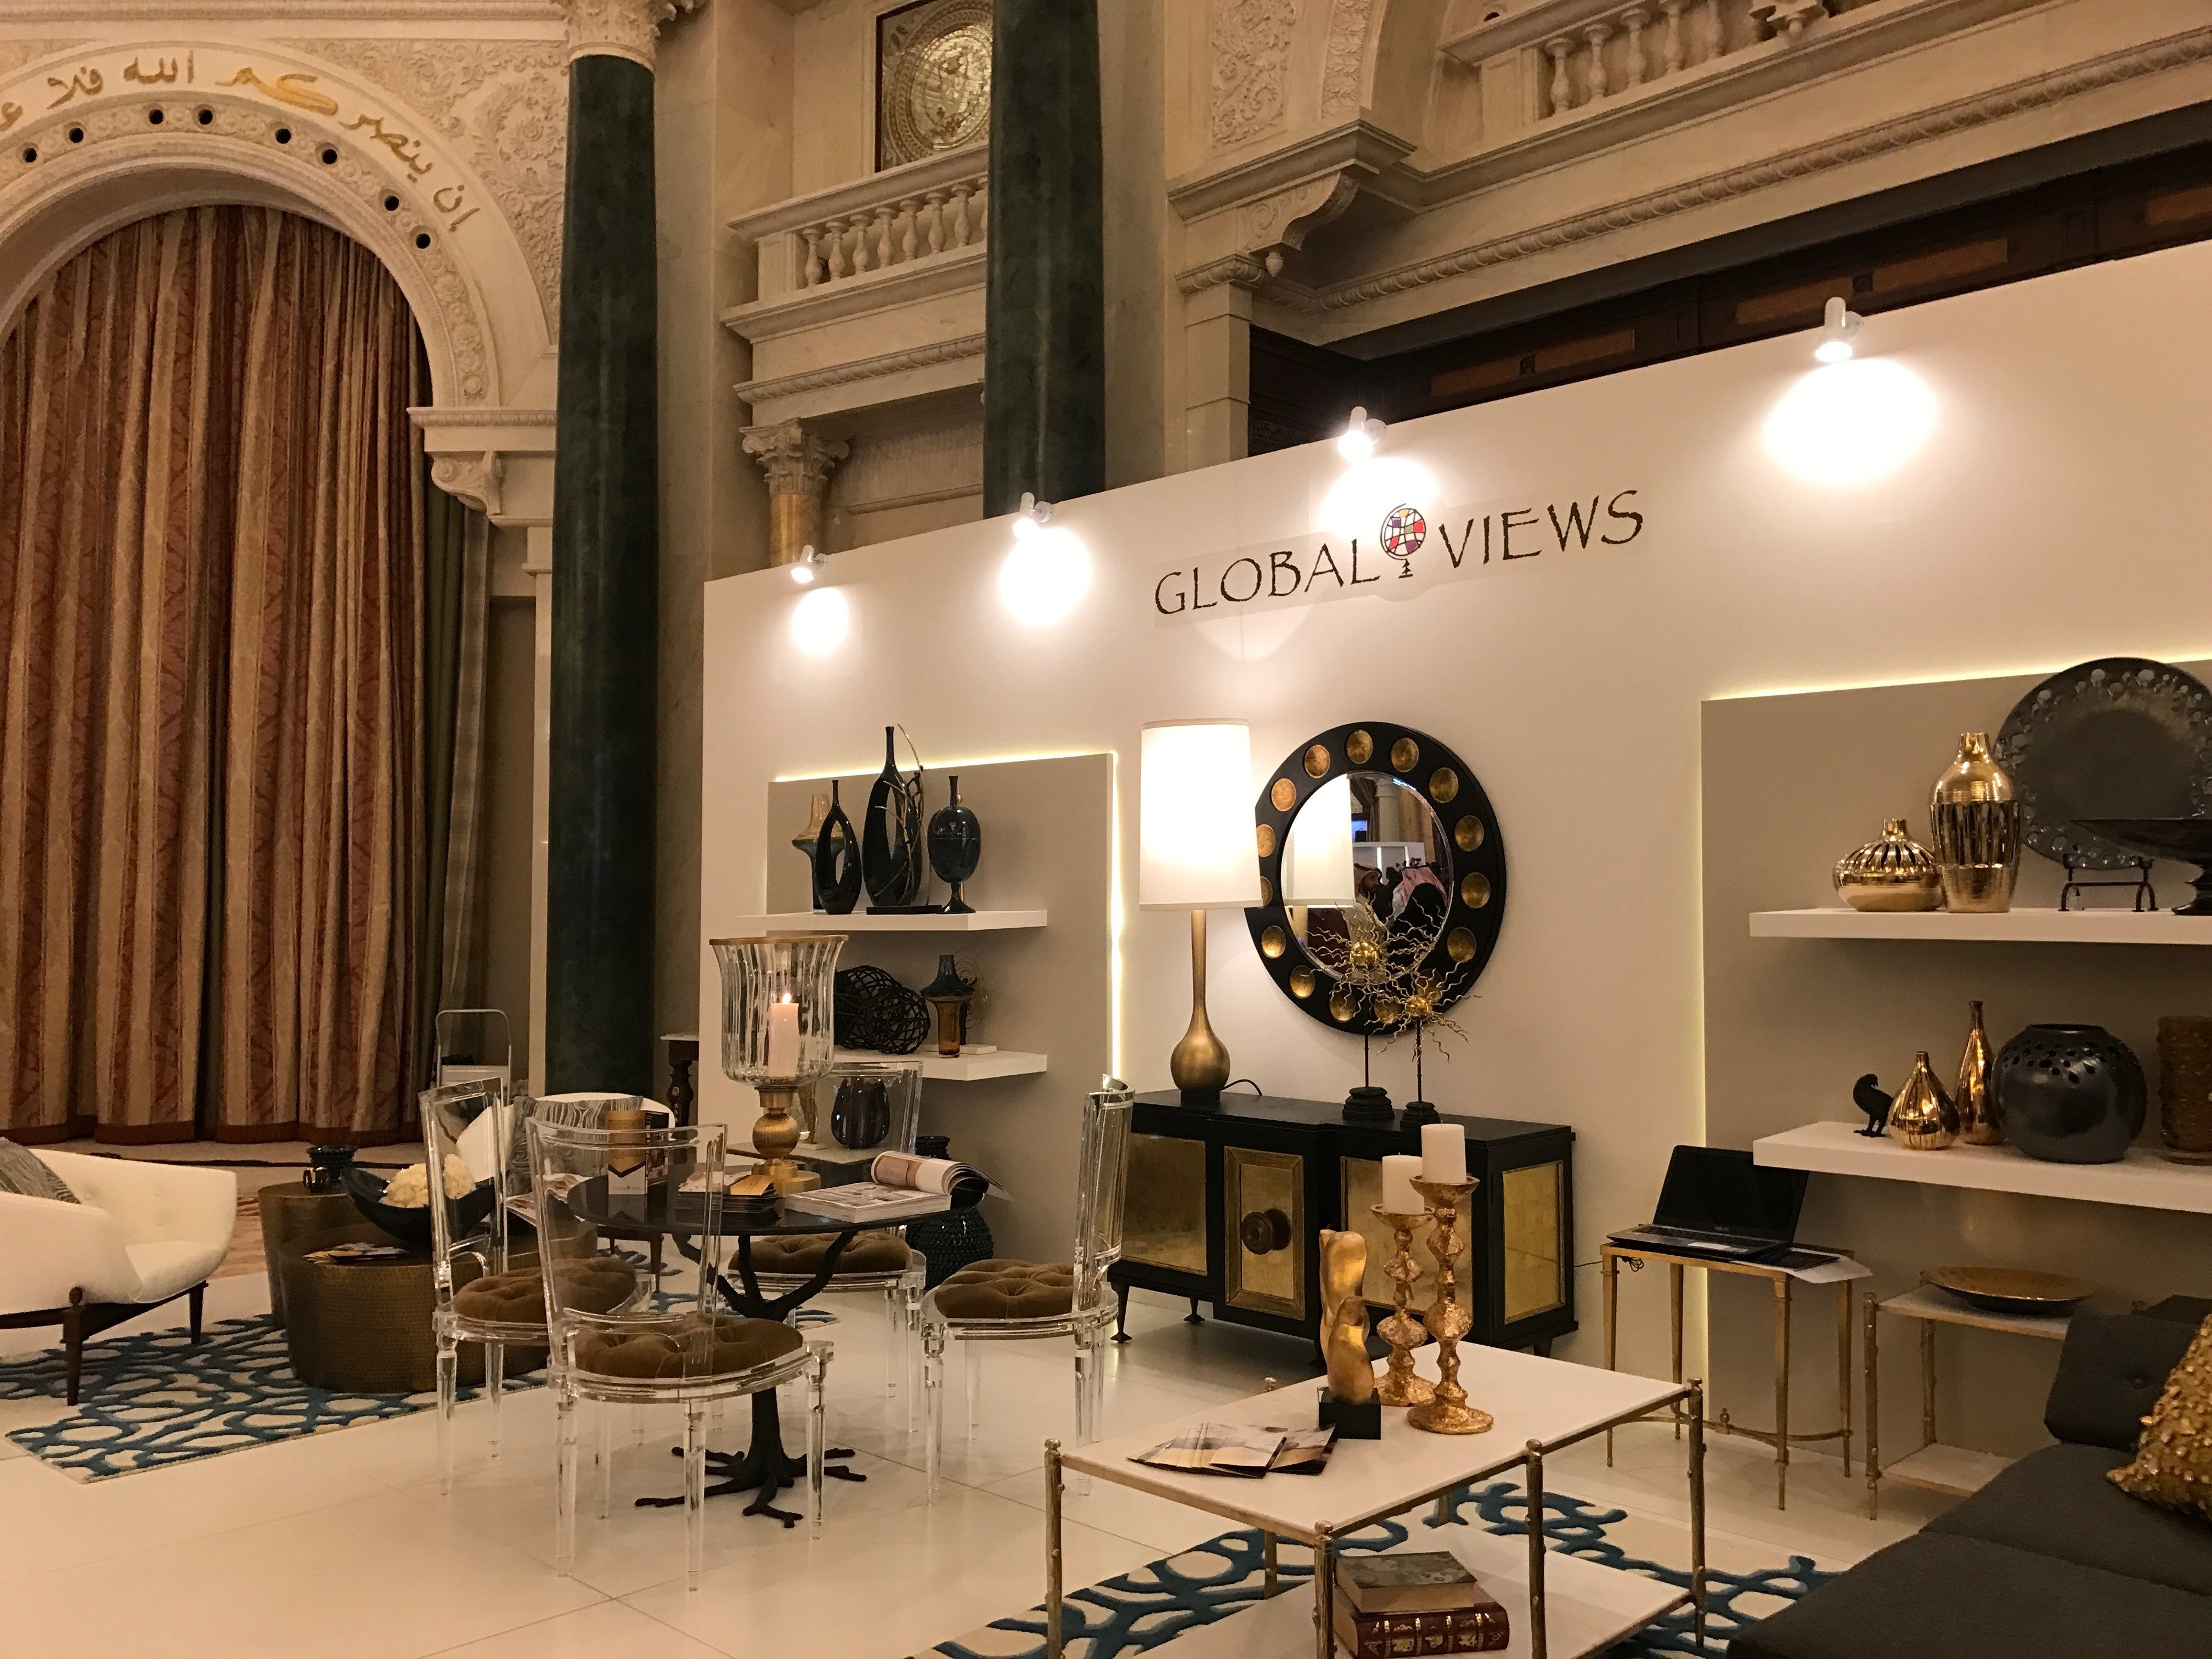 Global Views at American Express World Luxury Expo 2017